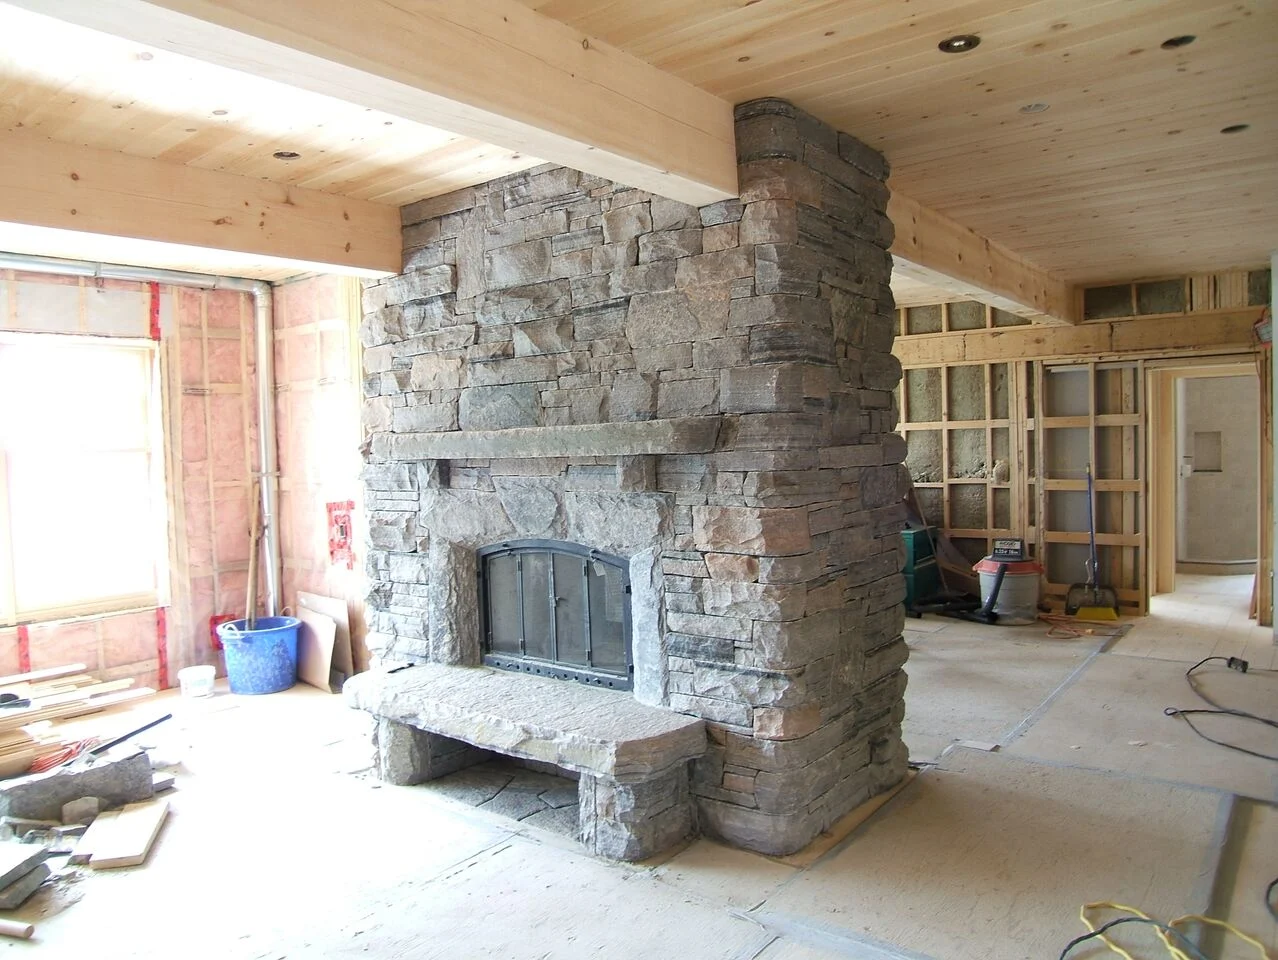 A home renovation with a new stone fireplace being installed in a completely remodelled living room.